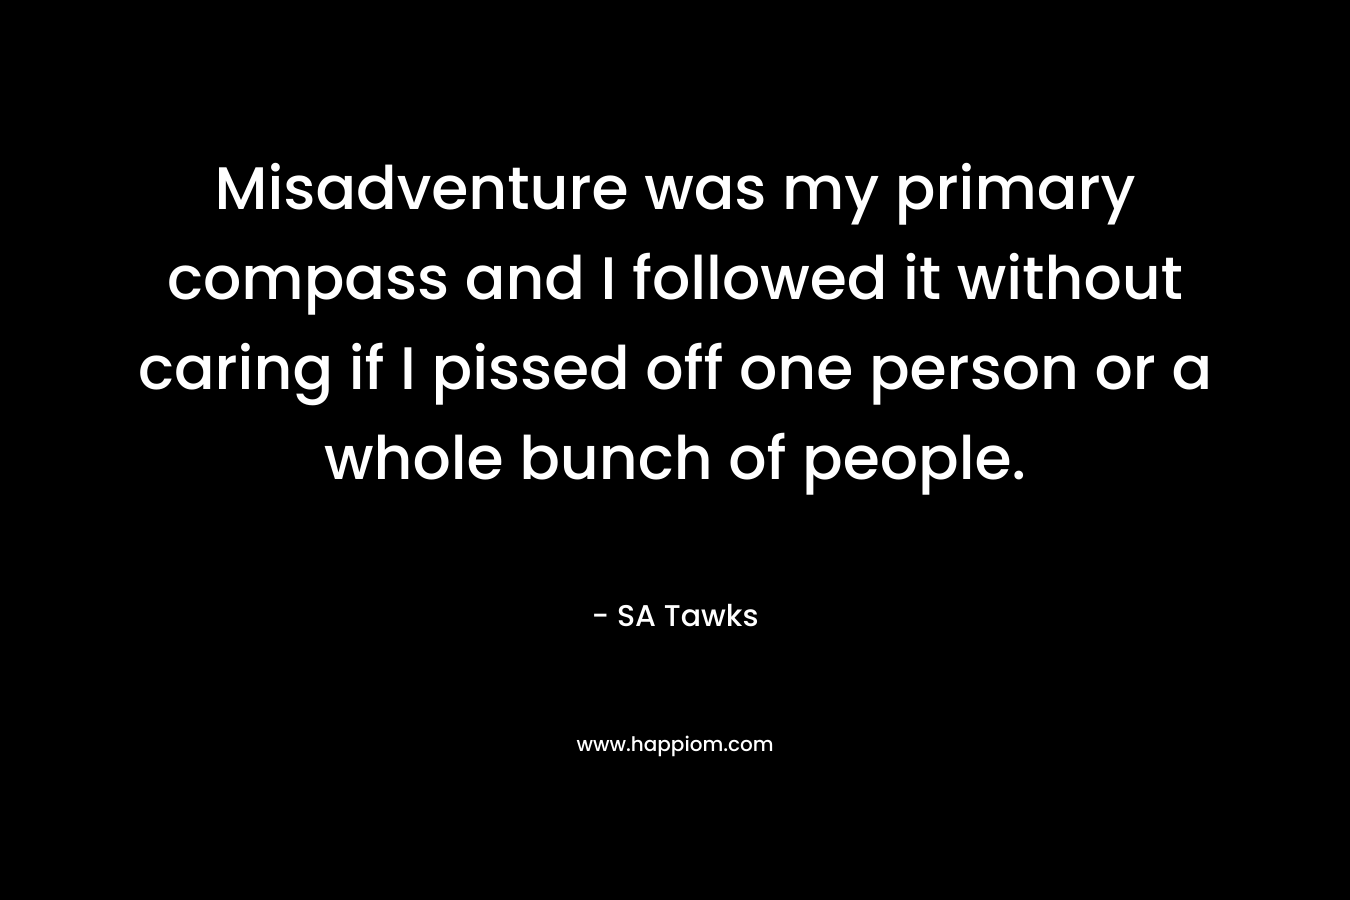 Misadventure was my primary compass and I followed it without caring if I pissed off one person or a whole bunch of people. – SA Tawks